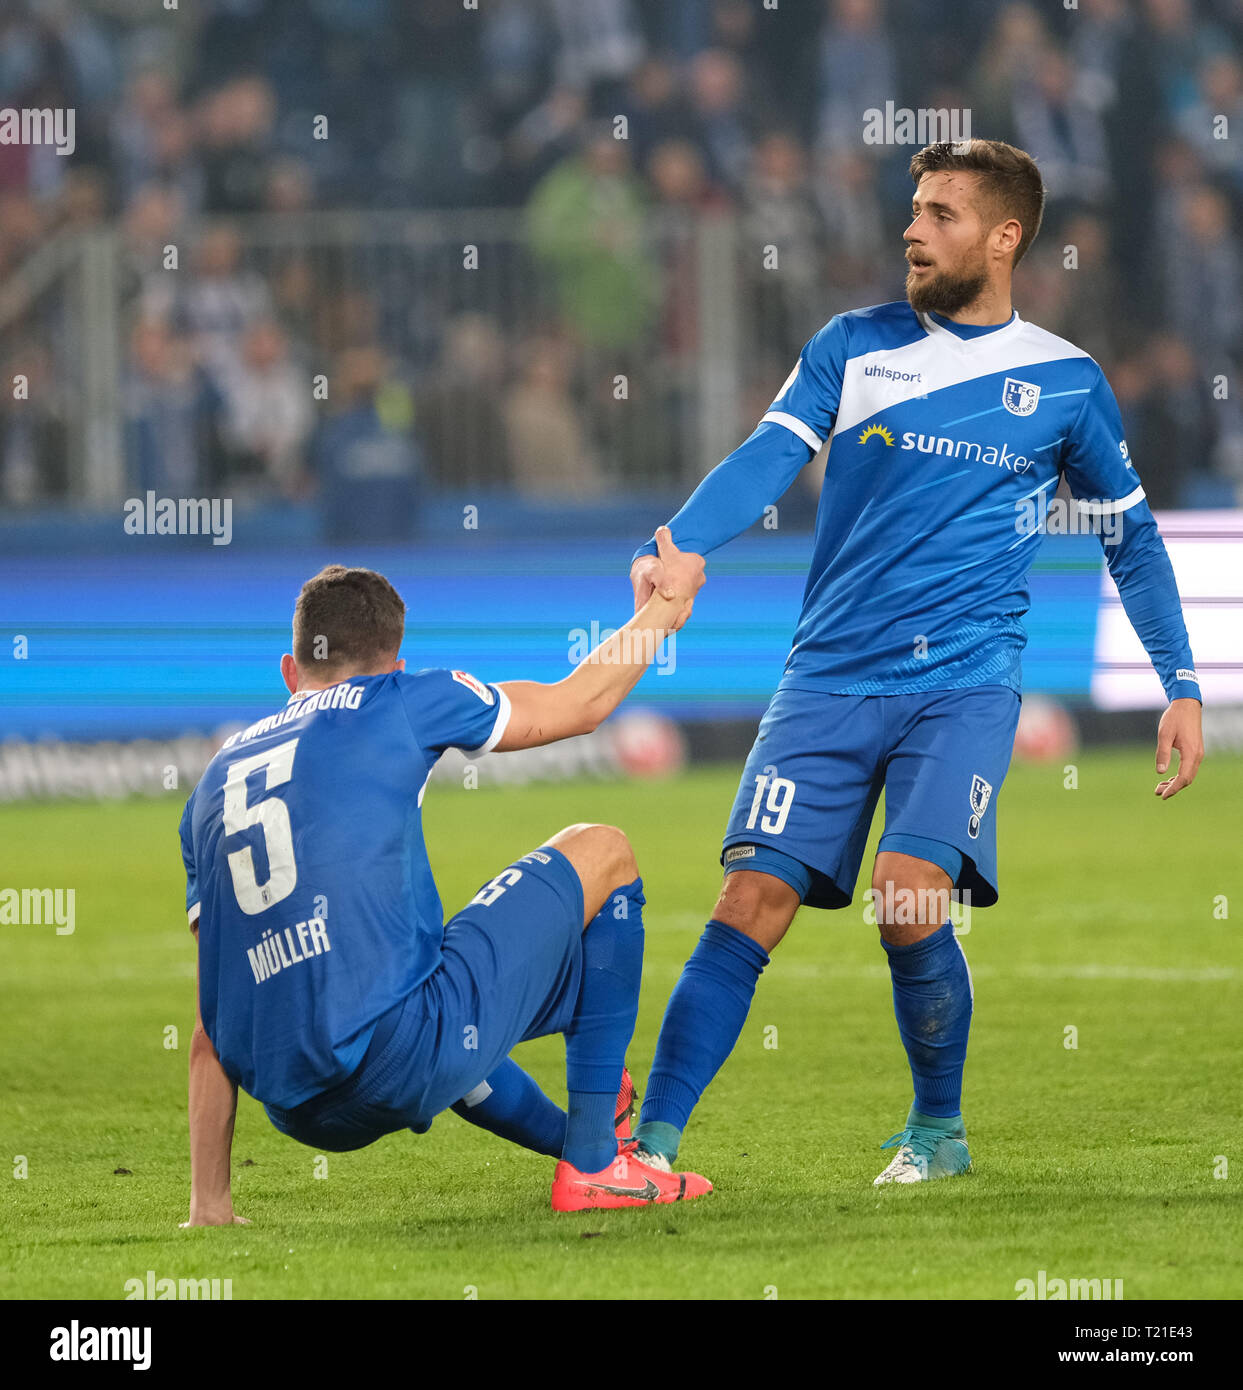 29 March 2019, Saxony-Anhalt, Magdeburg: Soccer: 2nd Bundesliga, 27th matchday, 1st FC Magdeburg - 1st FC Heidenheim in the MDCC-Arena in Magdeburg. Magdeburg's Tobias Müller (l) and Michel Niemeyer are standing on the grass after the match. Photo: Peter Steffen/dpa - IMPORTANT NOTE: In accordance with the requirements of the DFL Deutsche Fußball Liga or the DFB Deutscher Fußball-Bund, it is prohibited to use or have used photographs taken in the stadium and/or the match in the form of sequence images and/or video-like photo sequences. Stock Photo